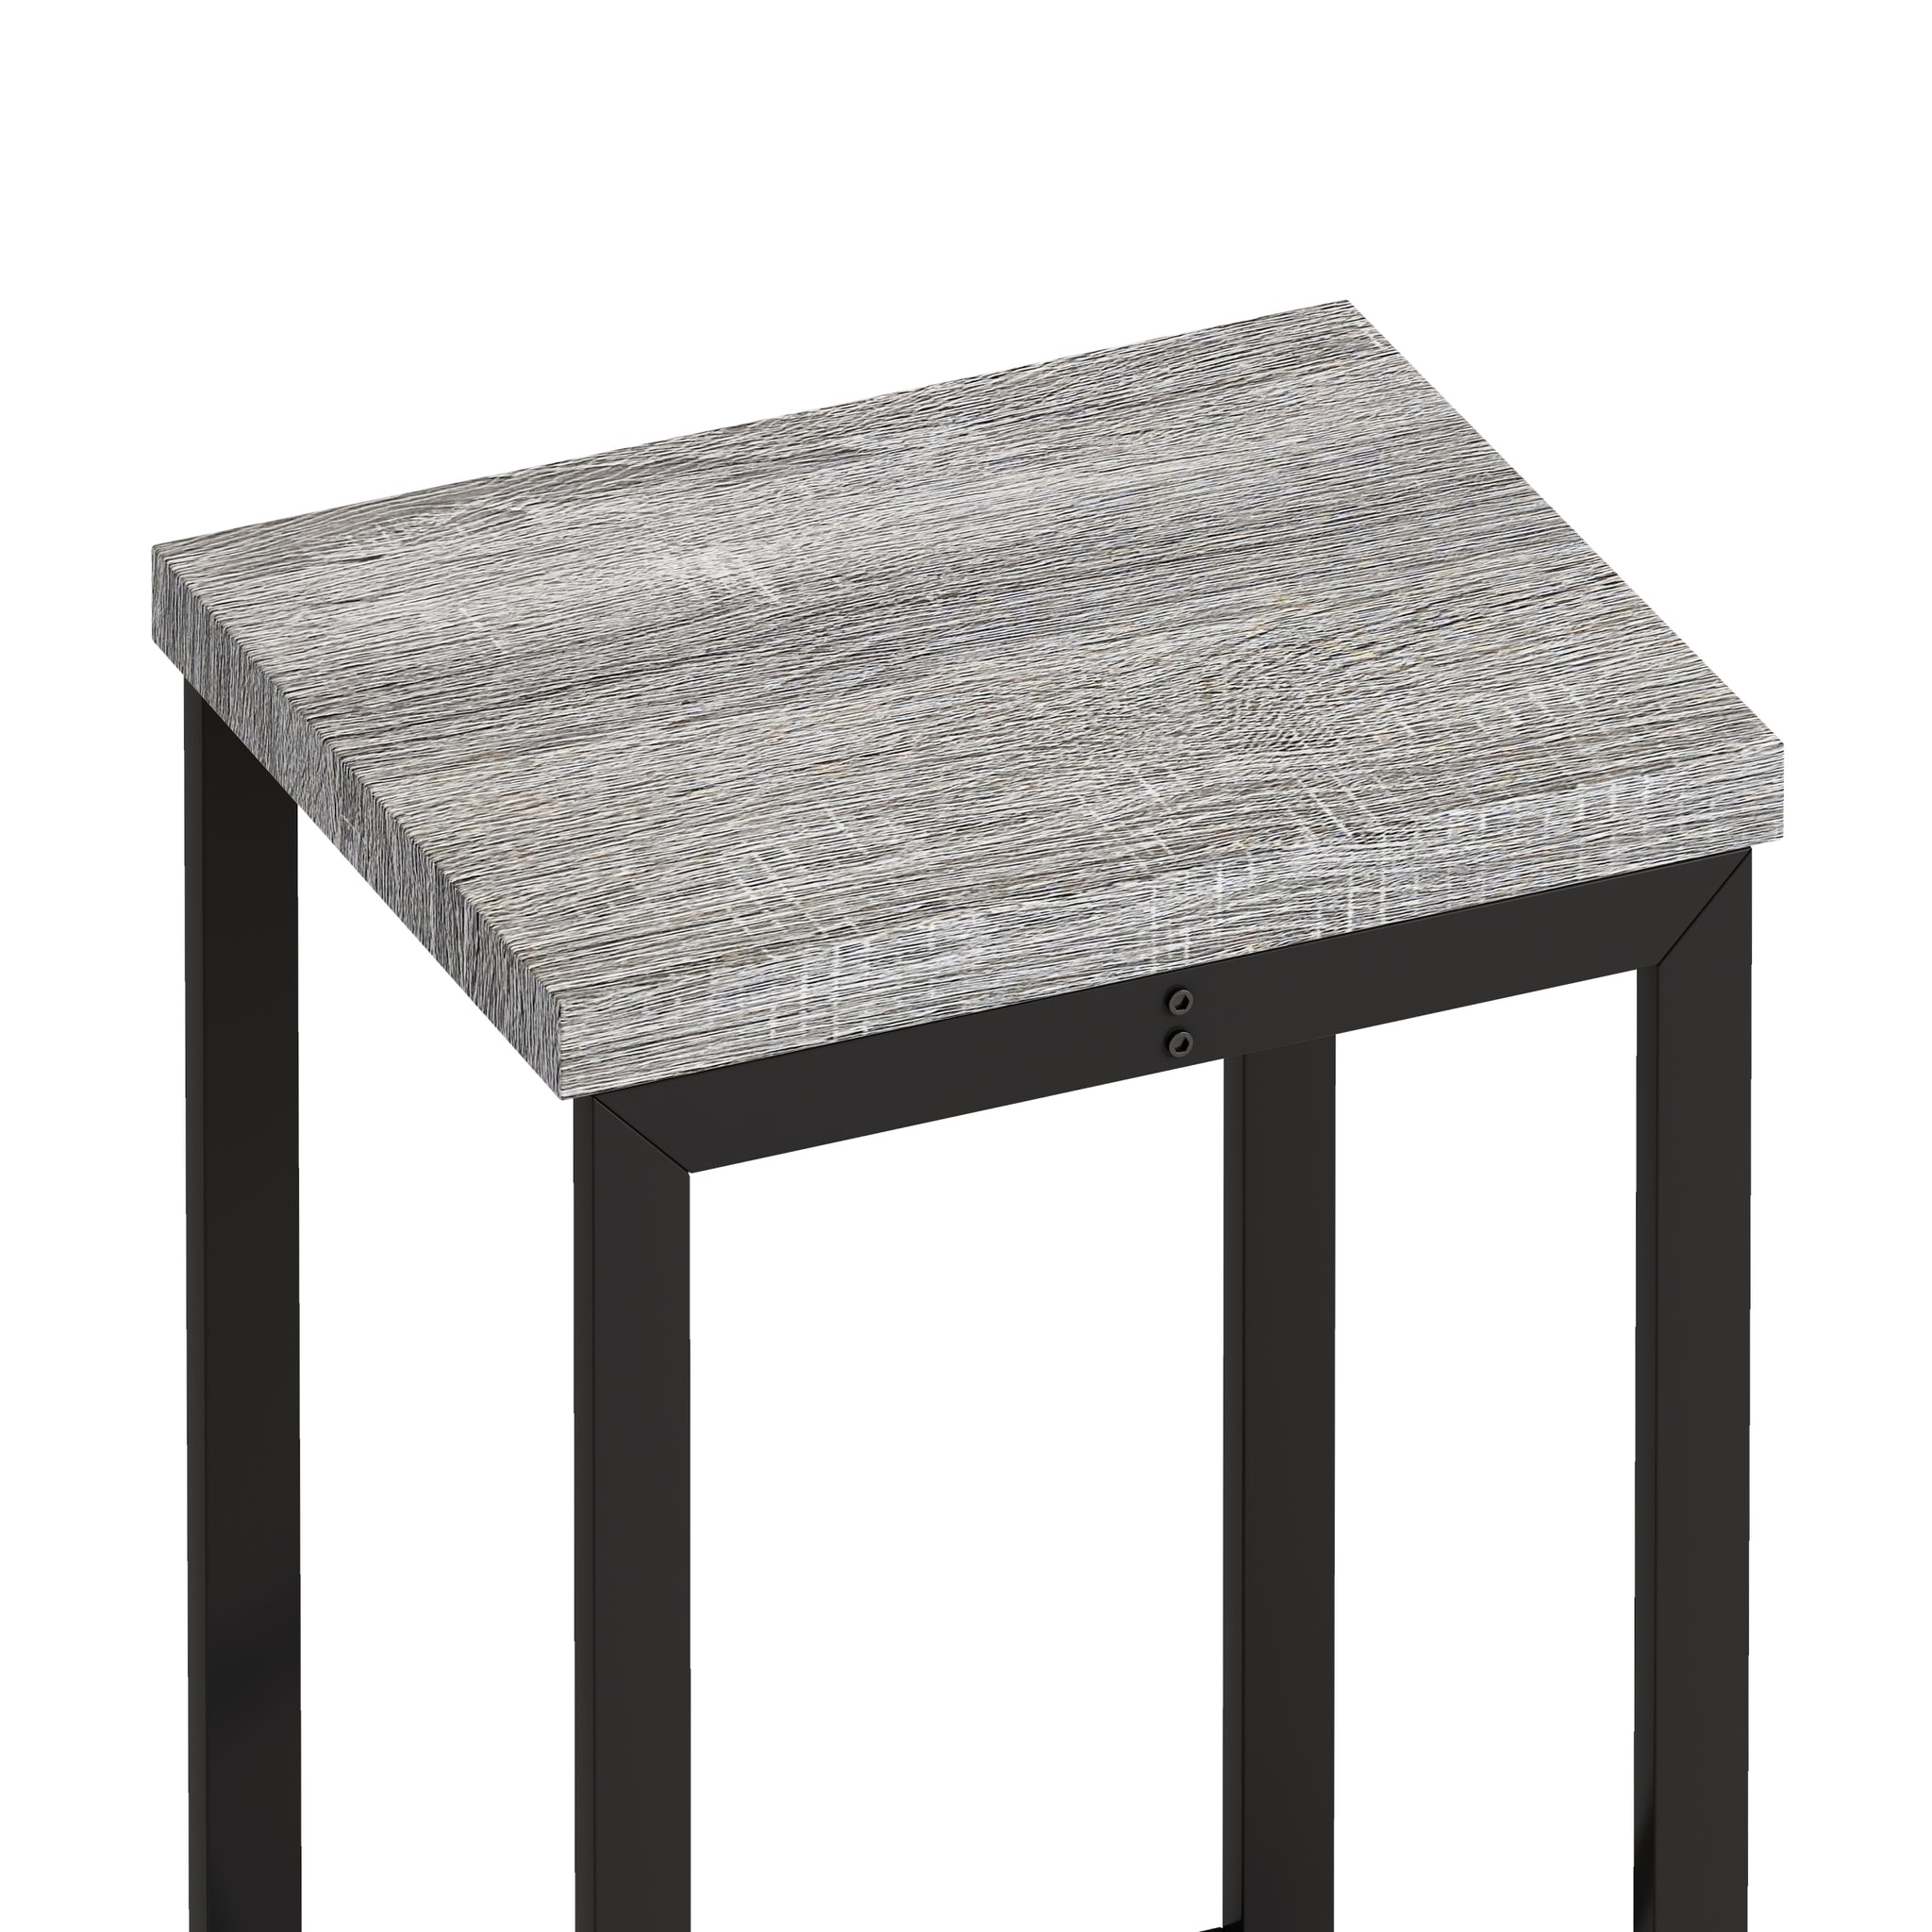 Modern Design Kitchen Dining Table, Pub Table, Long grey+black-desk and chair set-mdf+metal